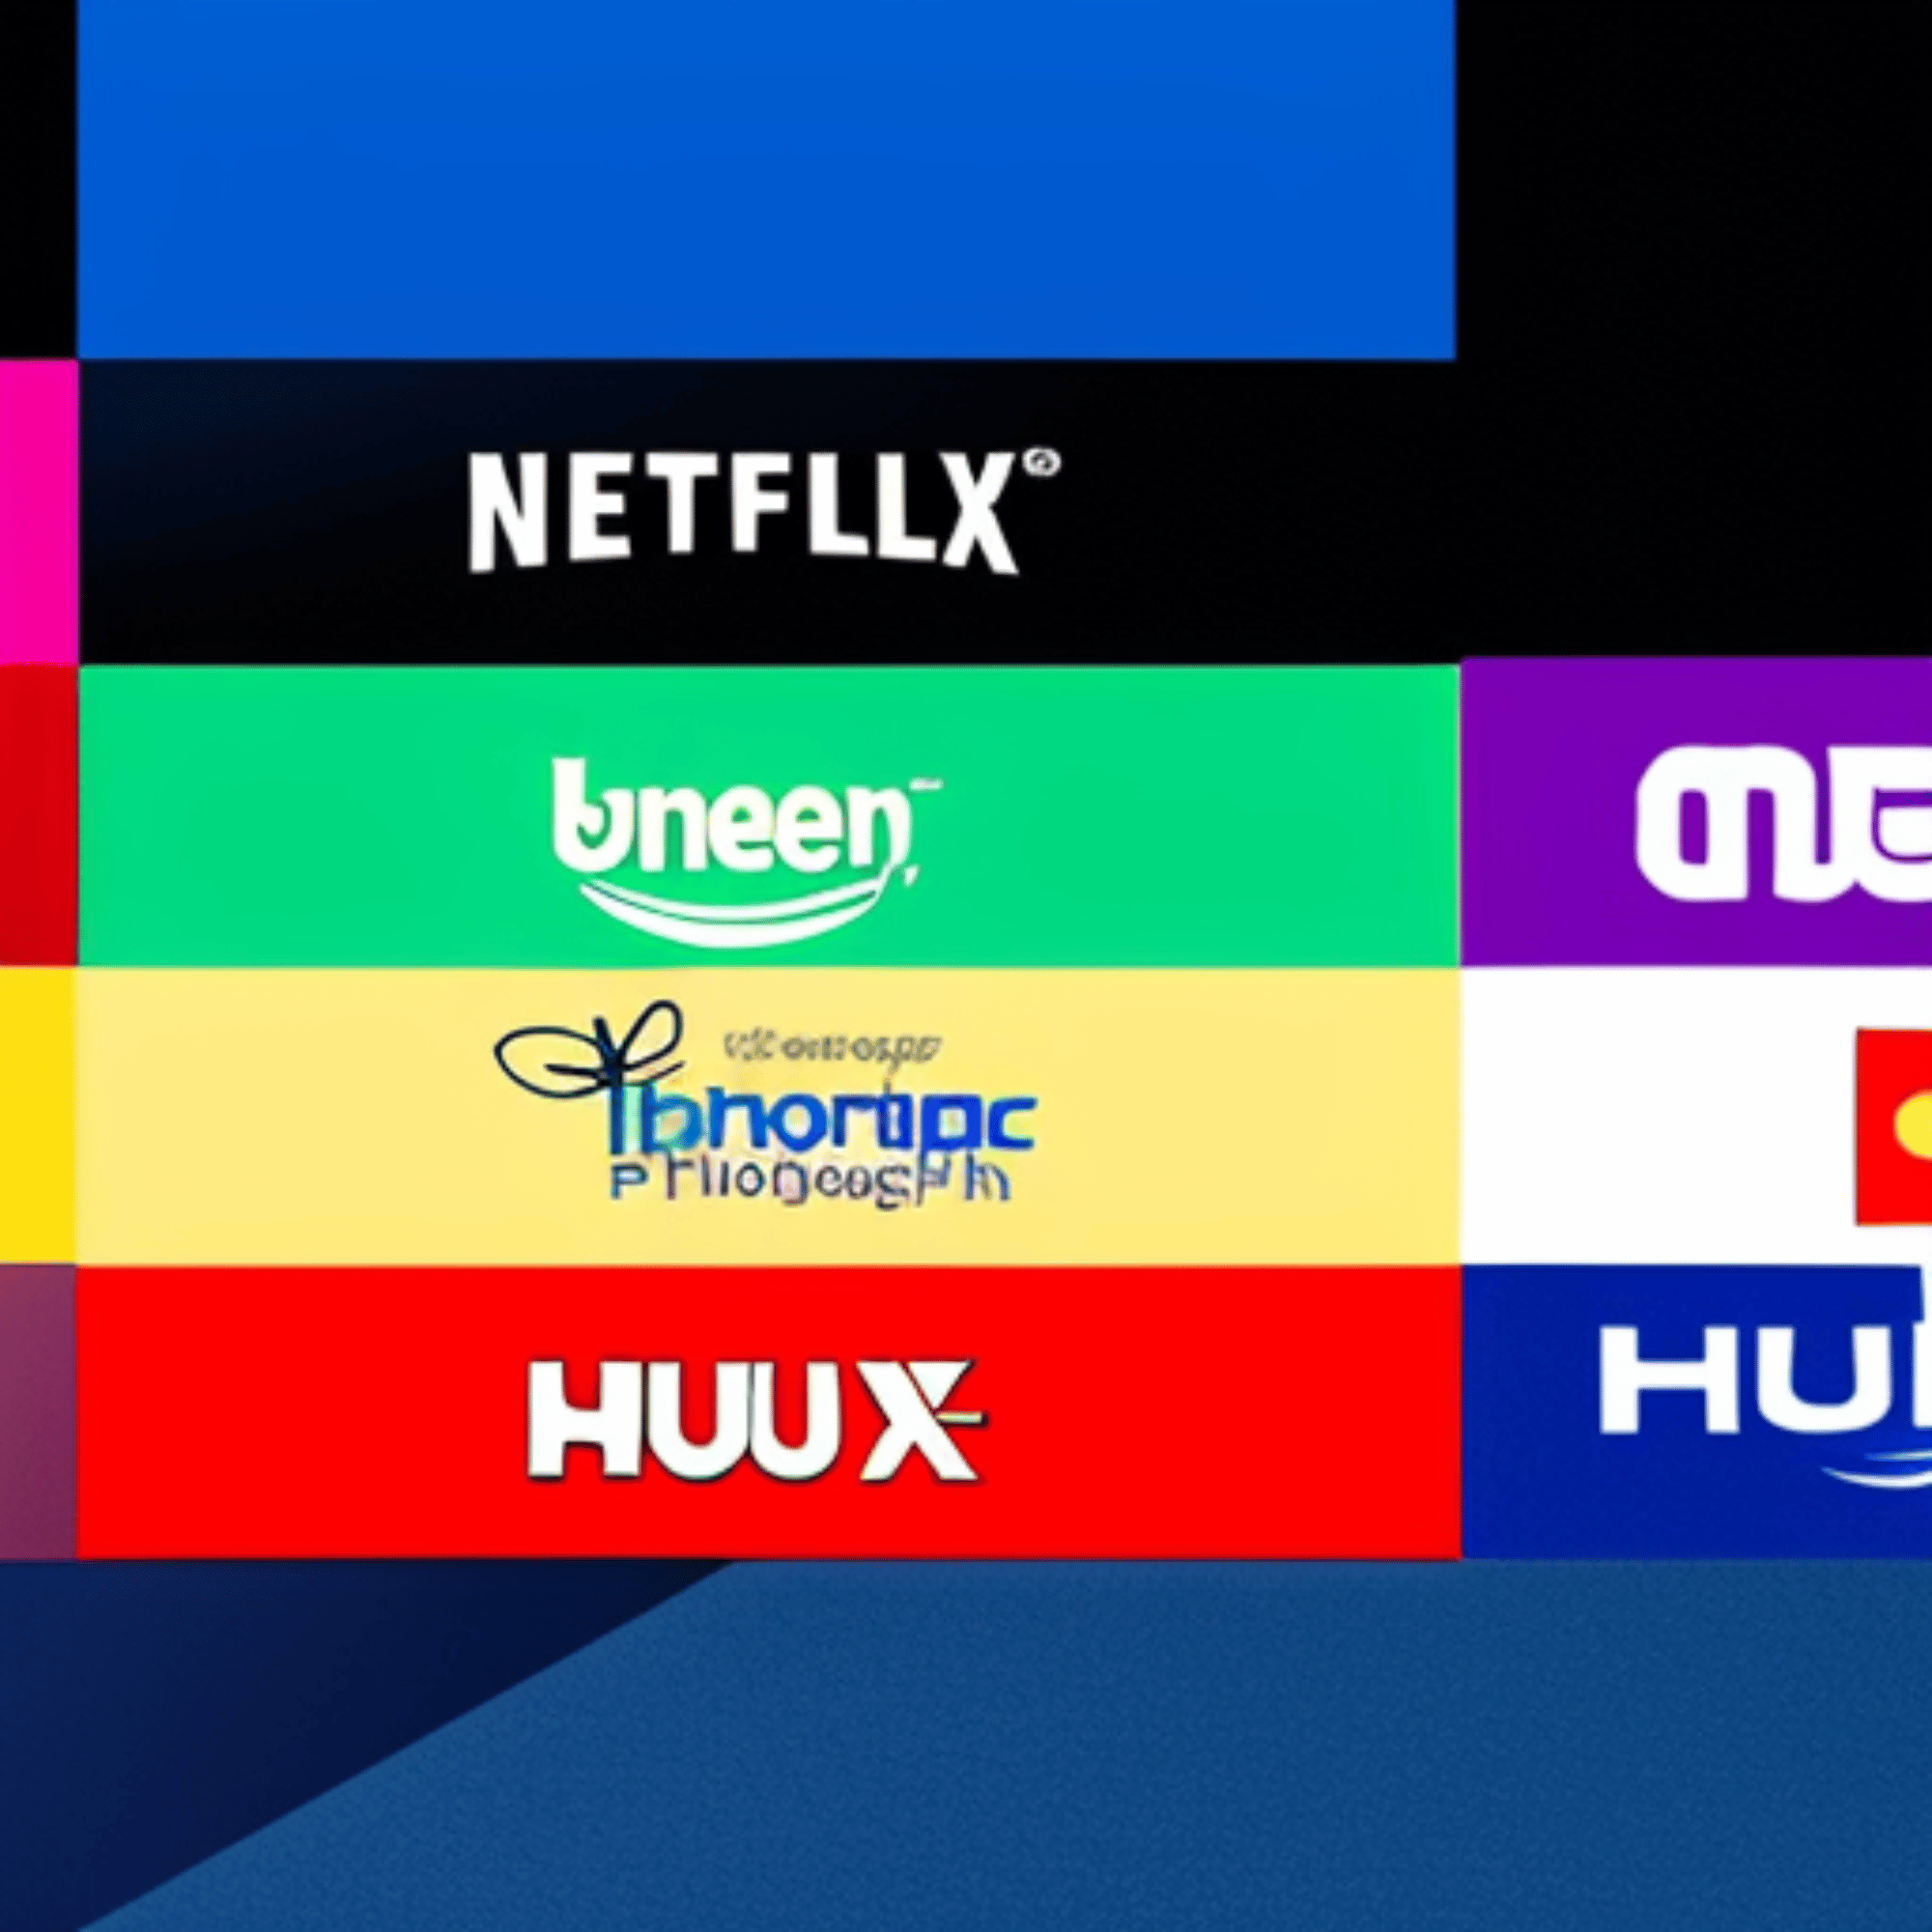 An illustration of multiple streaming services (e.g. Netflix, Hulu, Amazon Prime, Disney+, etc.) competing against each other in a ring